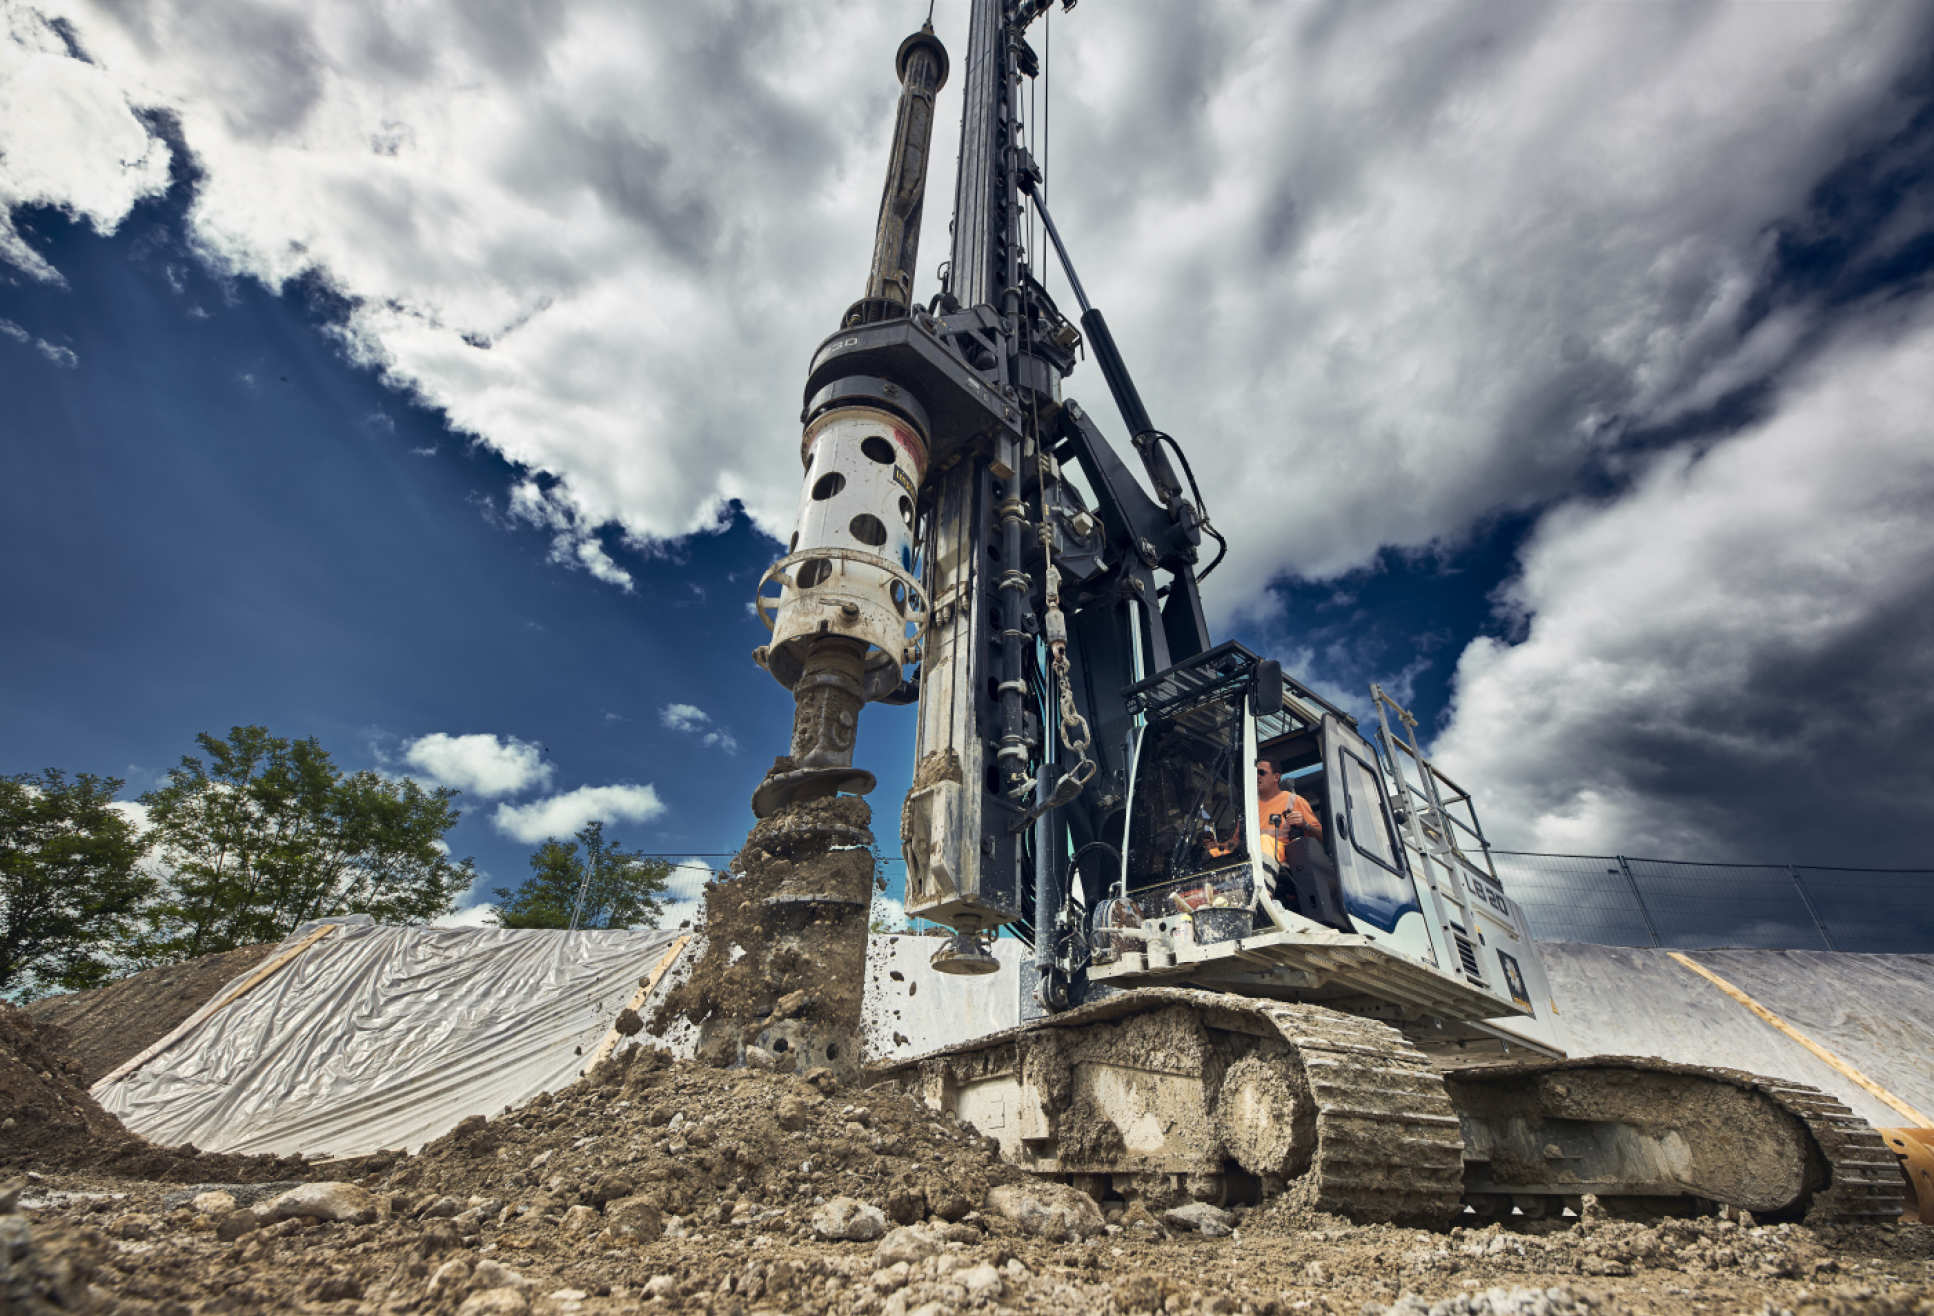 Giant drilling machine entering the ground